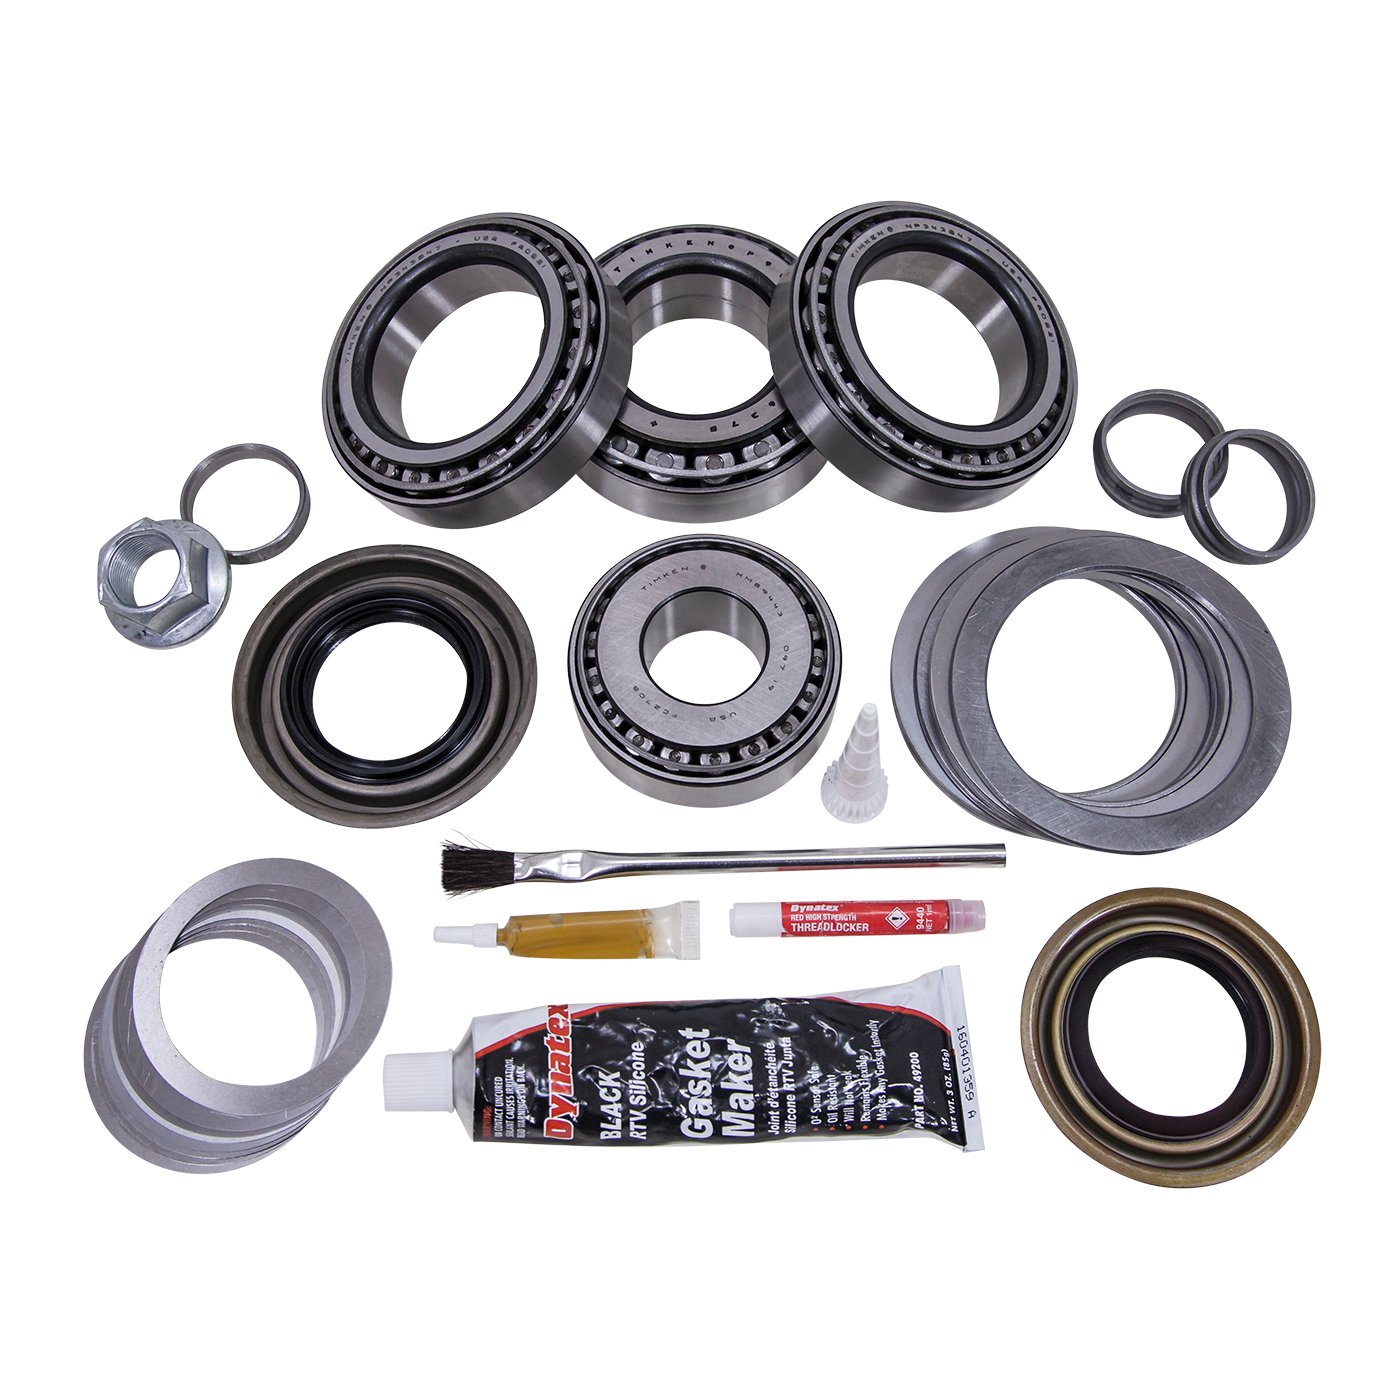 USA Standard ZK F9.75-C Master Overhaul Kit, For '08-'10 Ford 9.75 in. Differential.